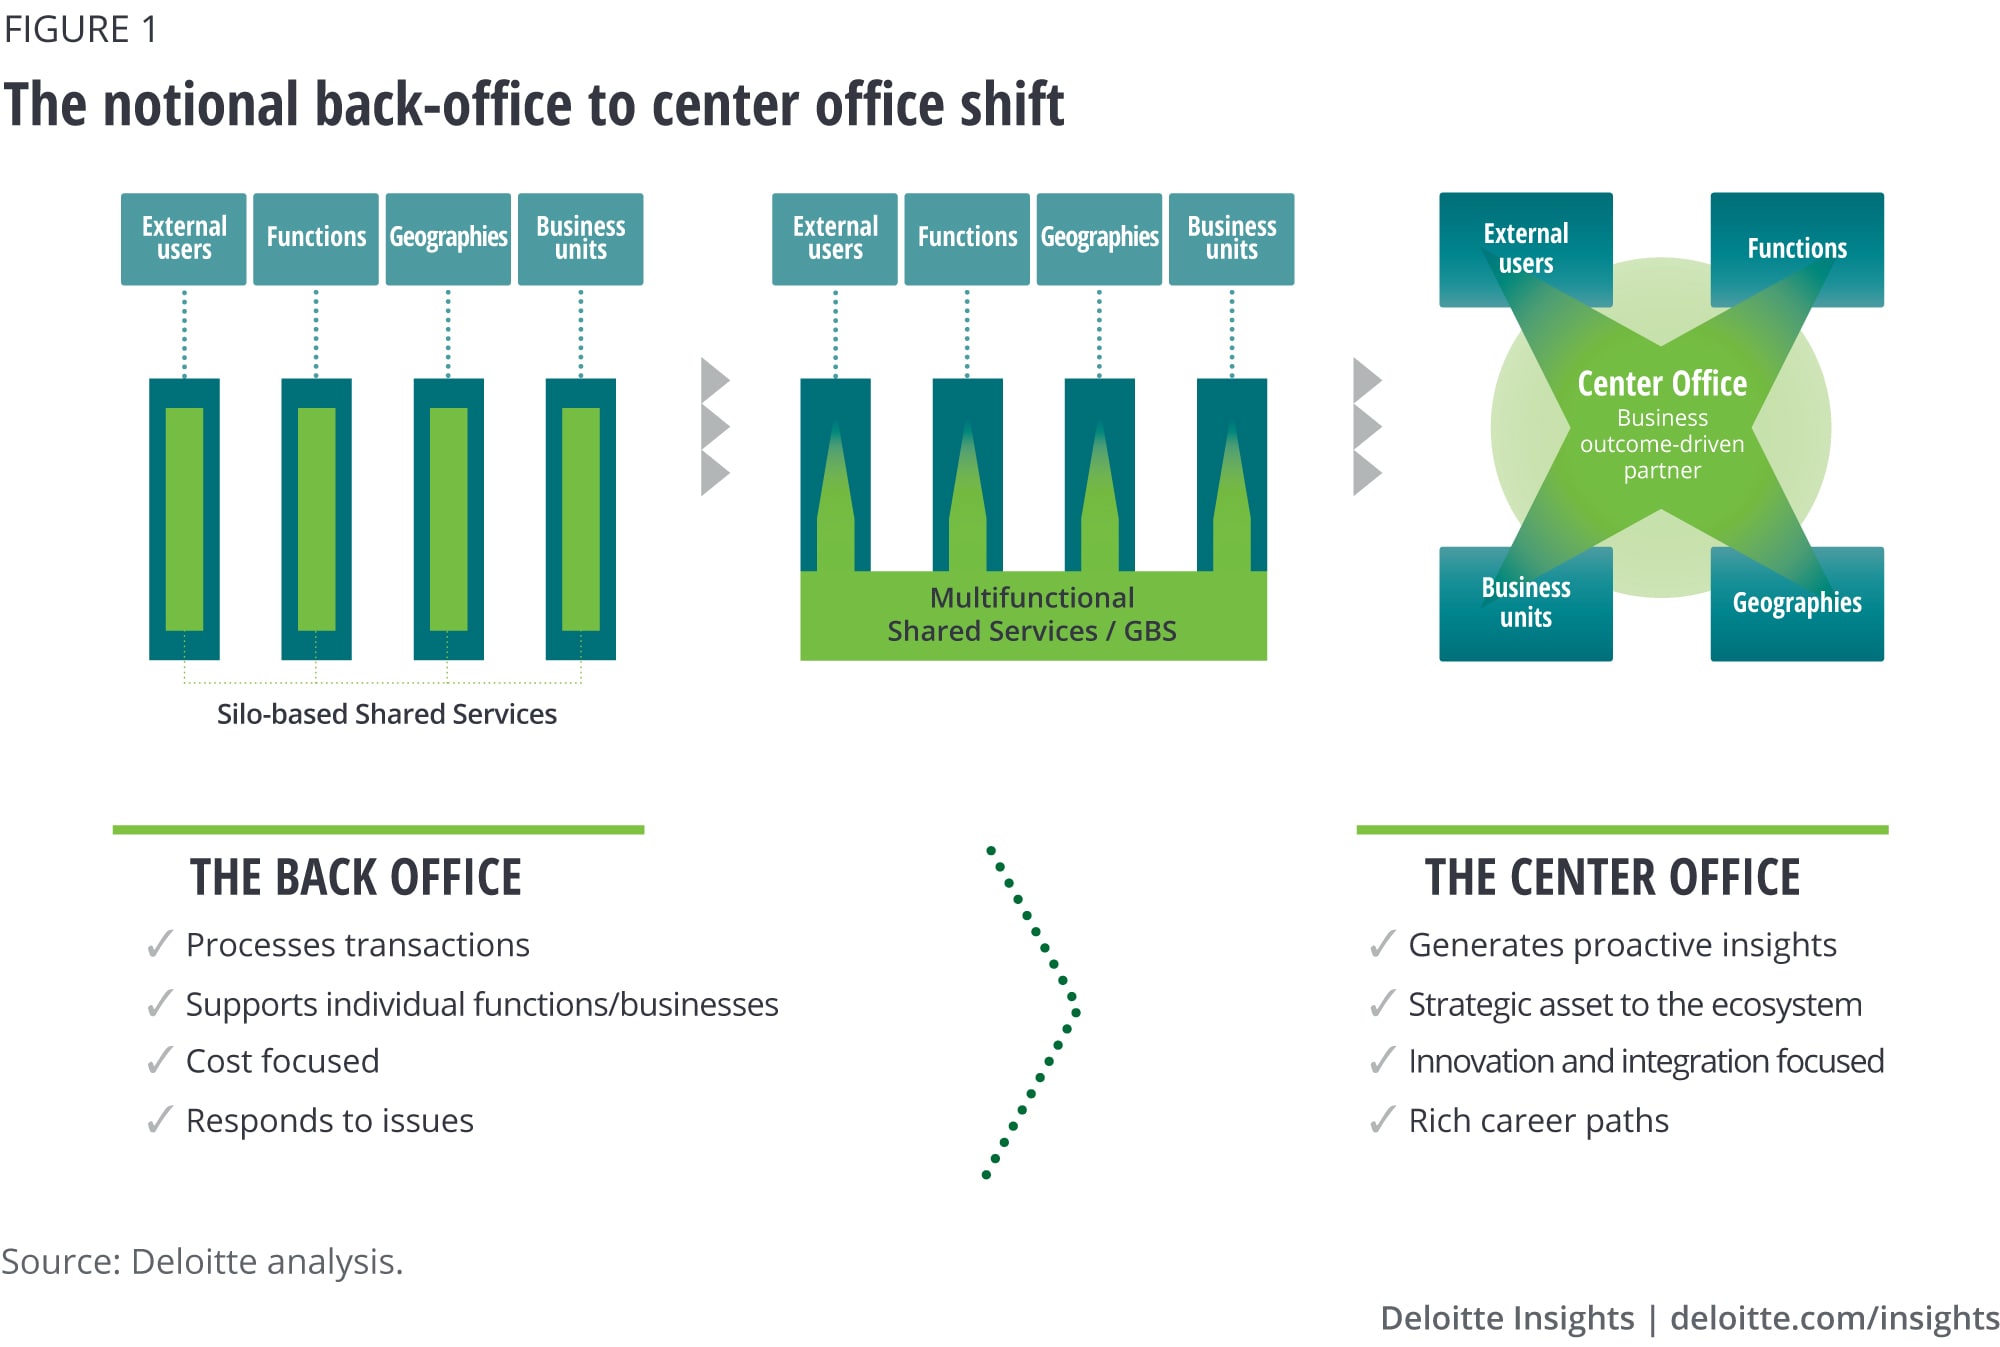 The notional back-office to center-office shift